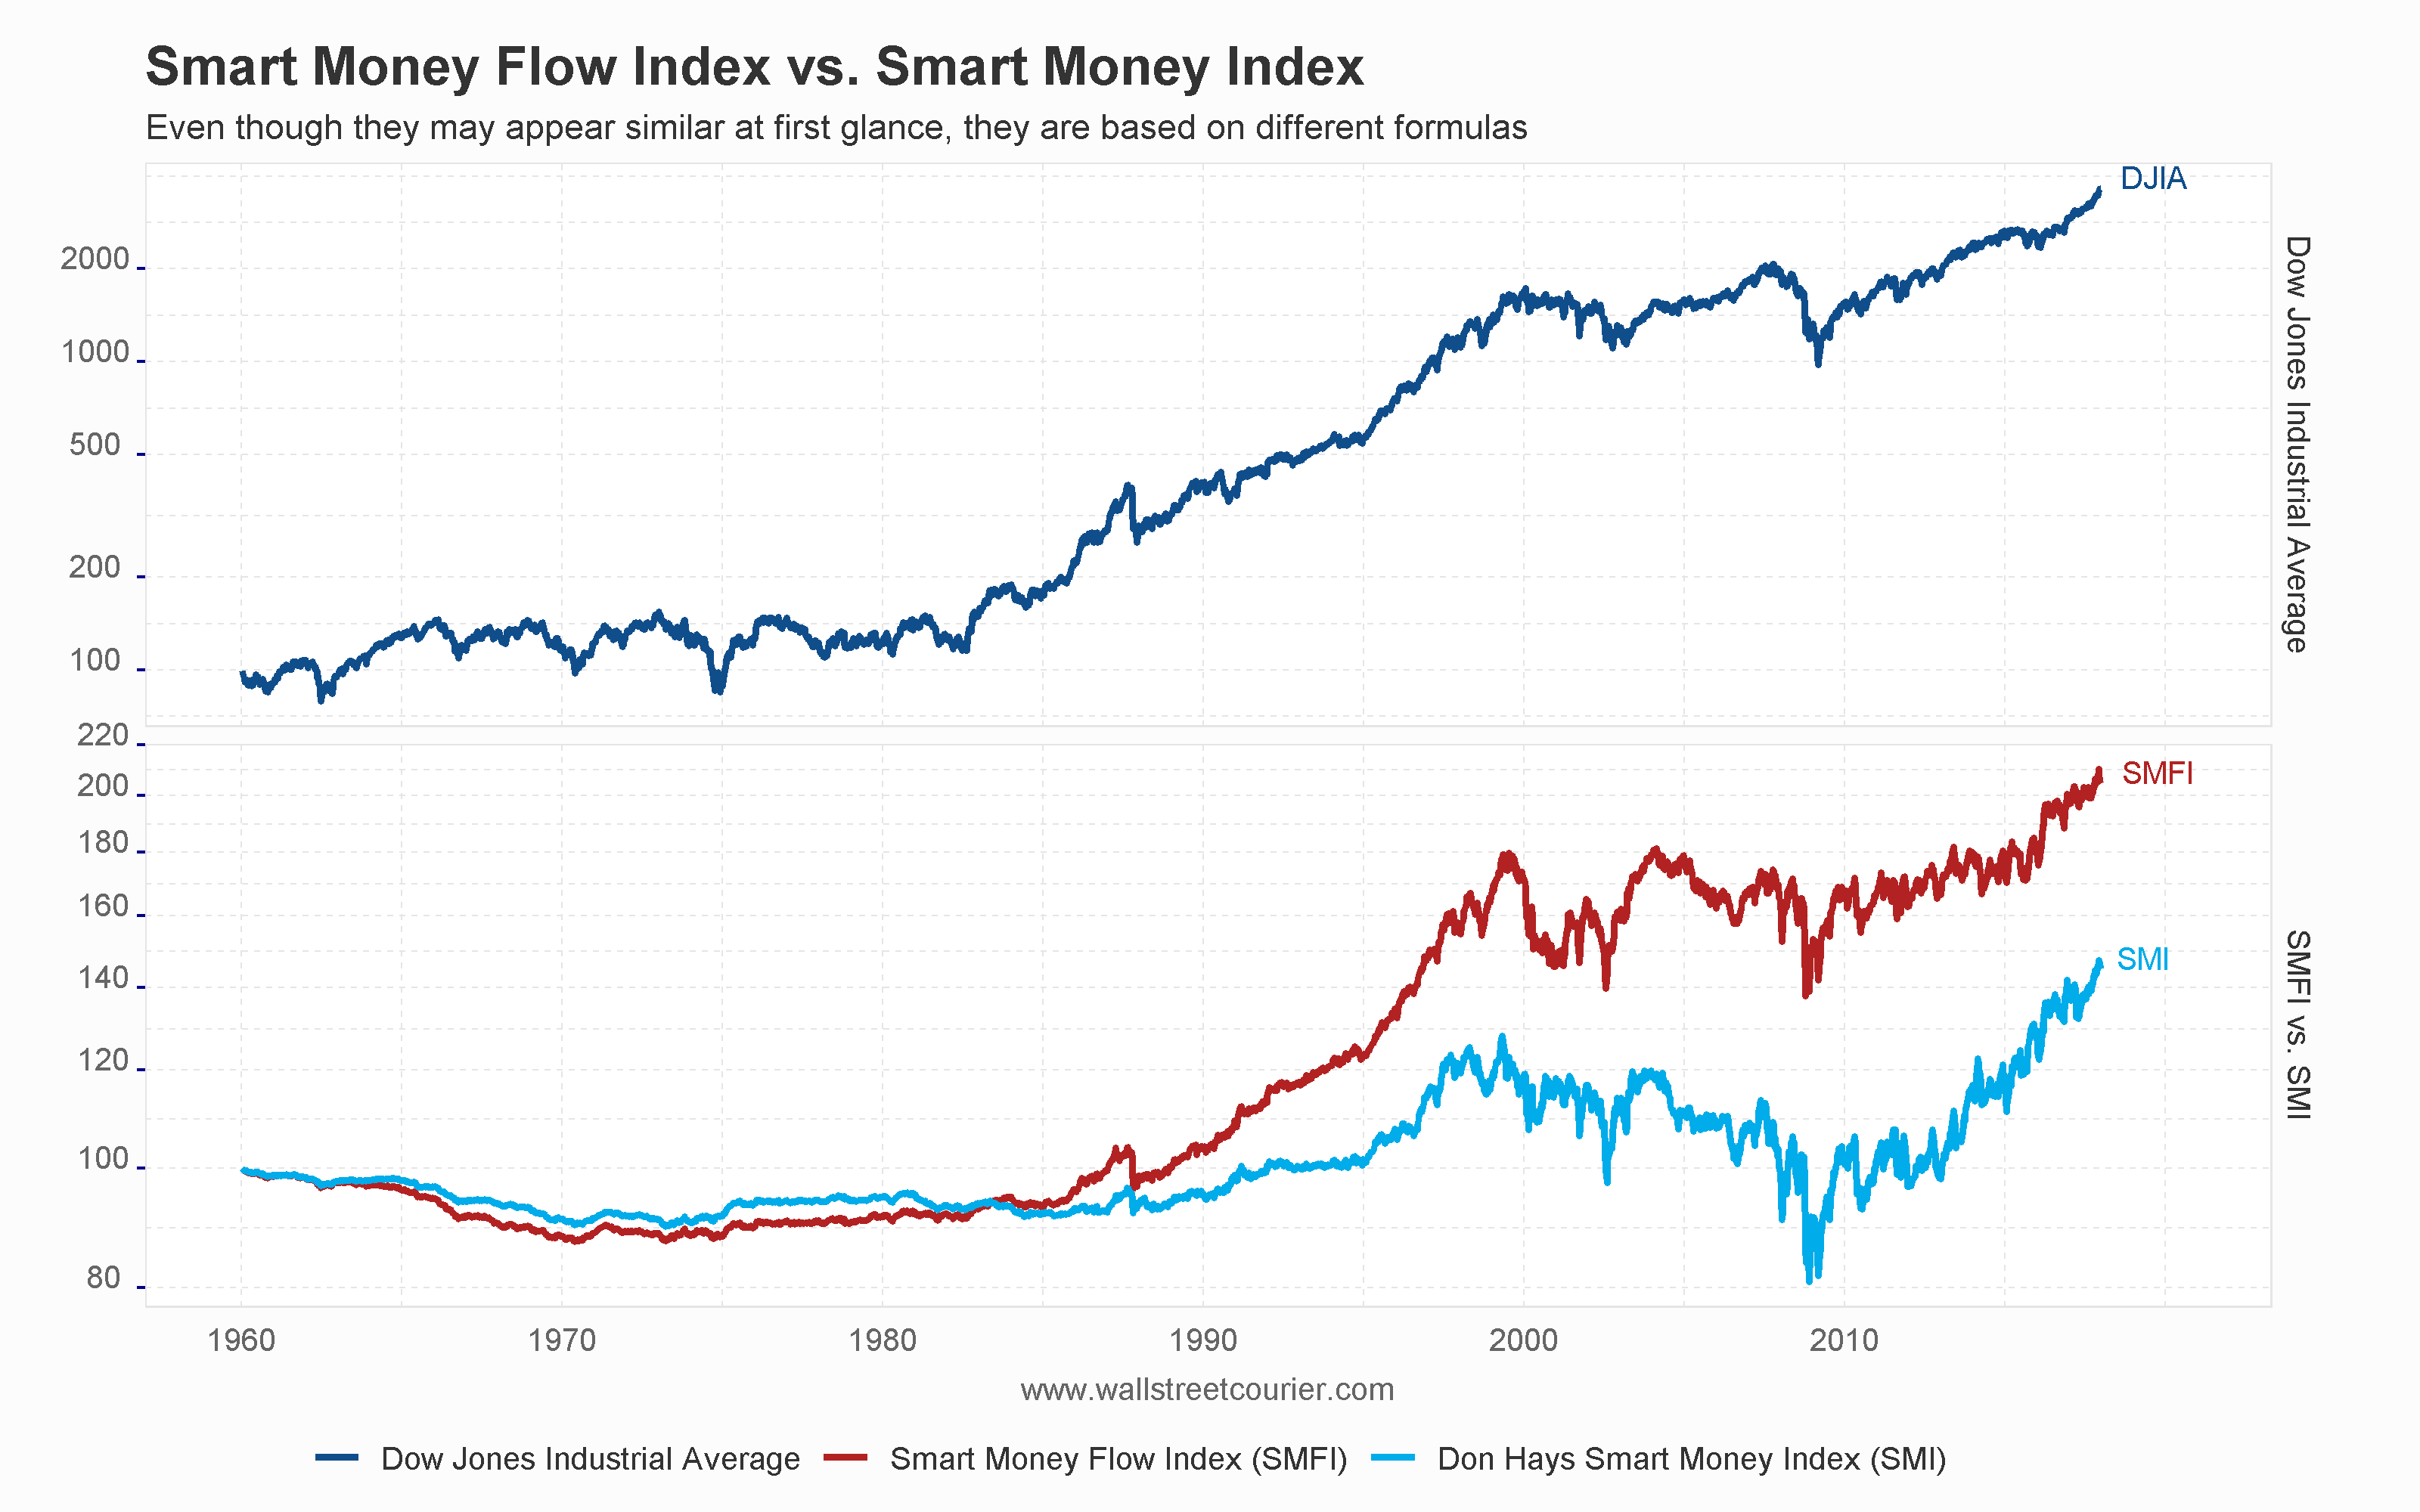 Chart comparing the Smart Money Flow Index (SMFI) and the Smart Money Index (SMI) to the Dow Jones Industrial Average on a monthly time frame, highlighting the distinct developments and differences between the two indicators